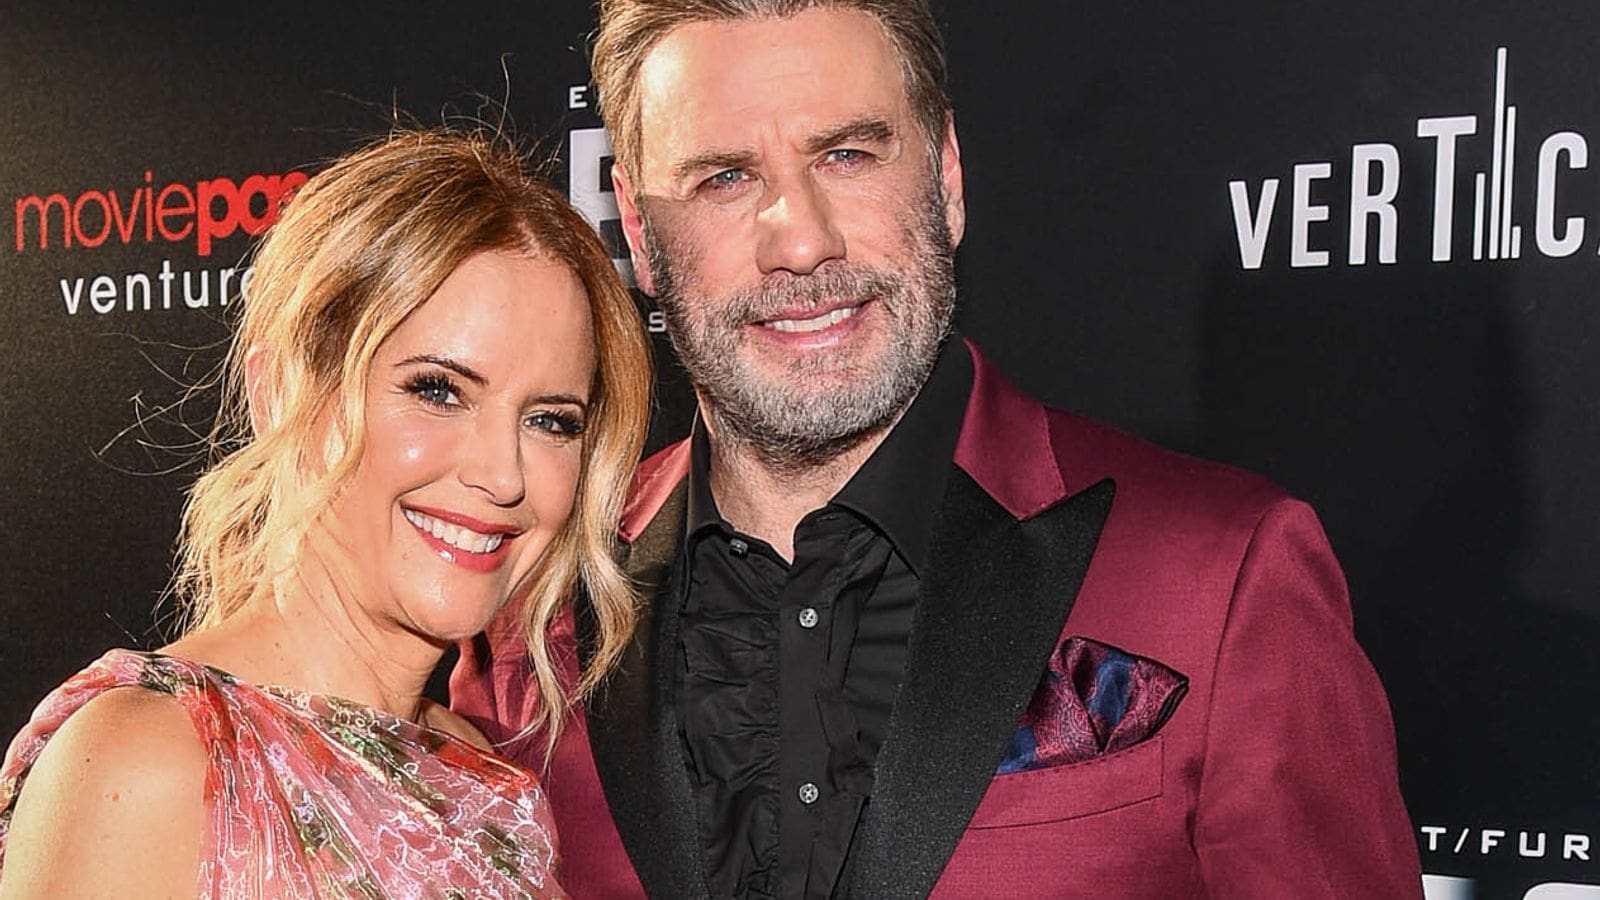 John Travolta's Wife Kelly Preston Passed Away After A Hard Battle With Breast Cancer